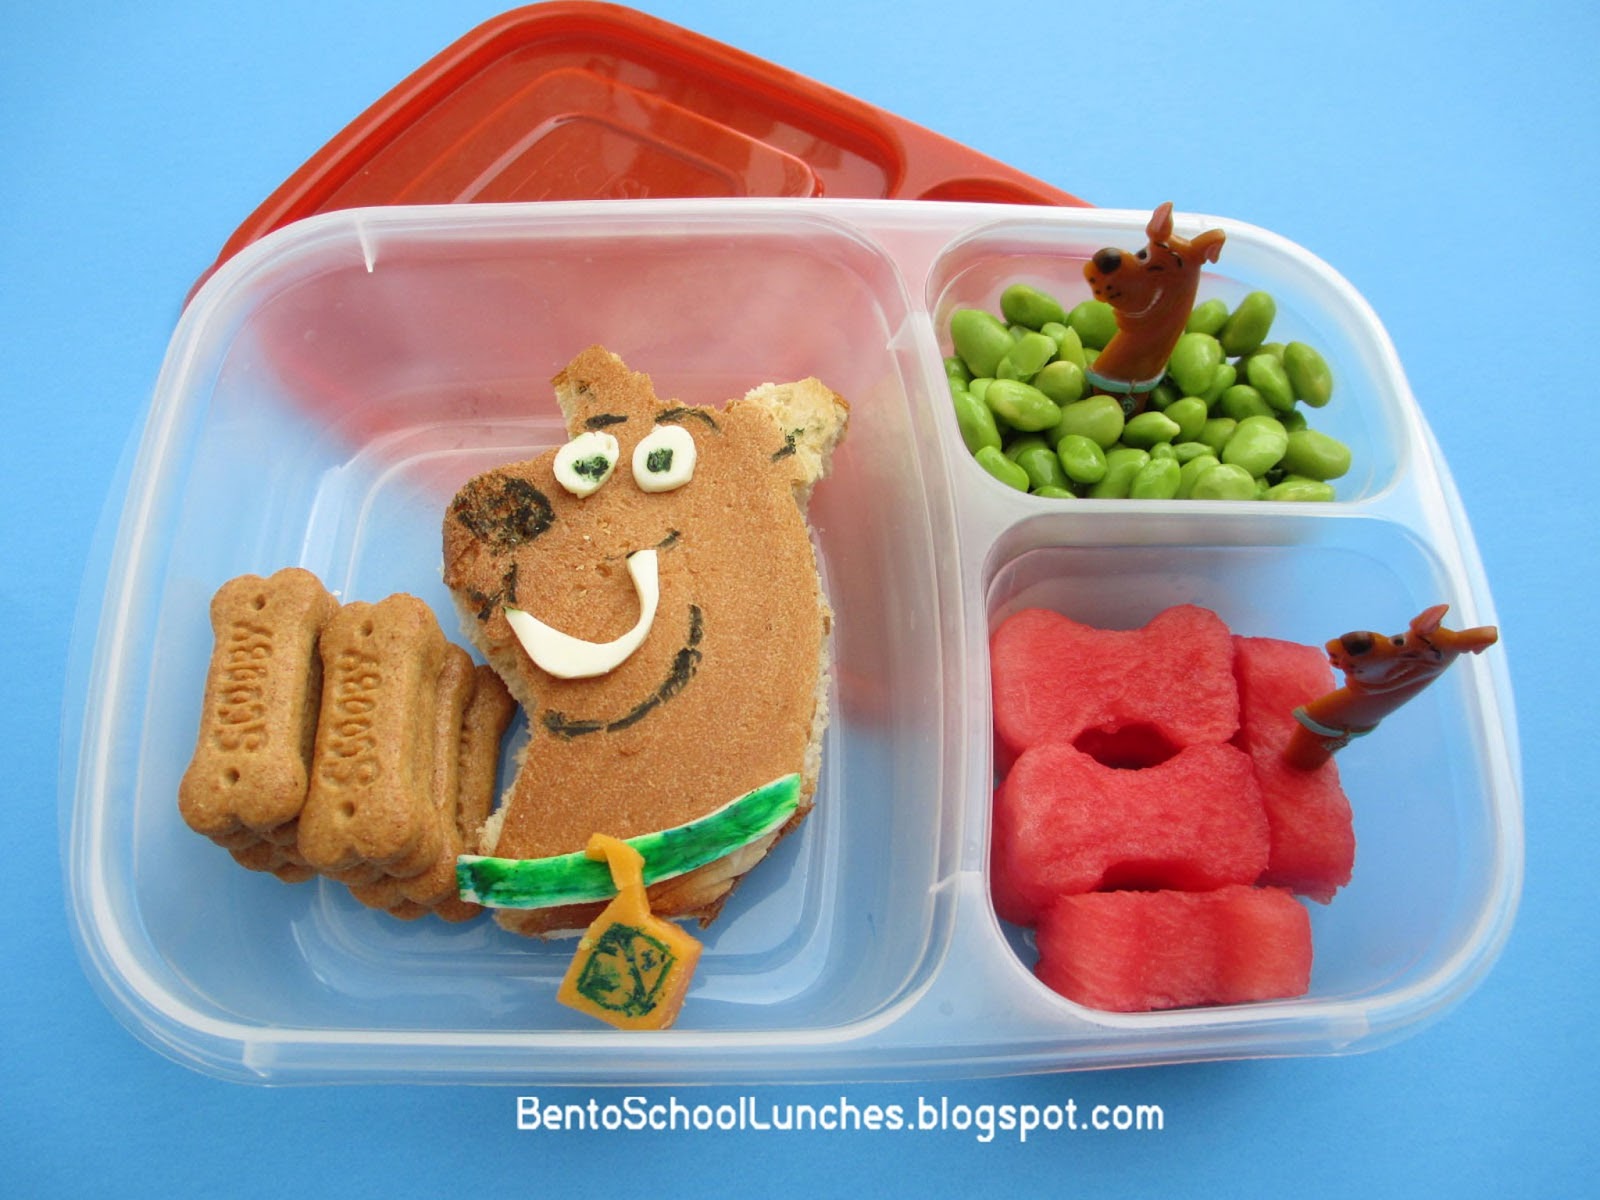 Bento School Lunches : Review: Easy LunchBox and Scooby-Doo Bento Lunch